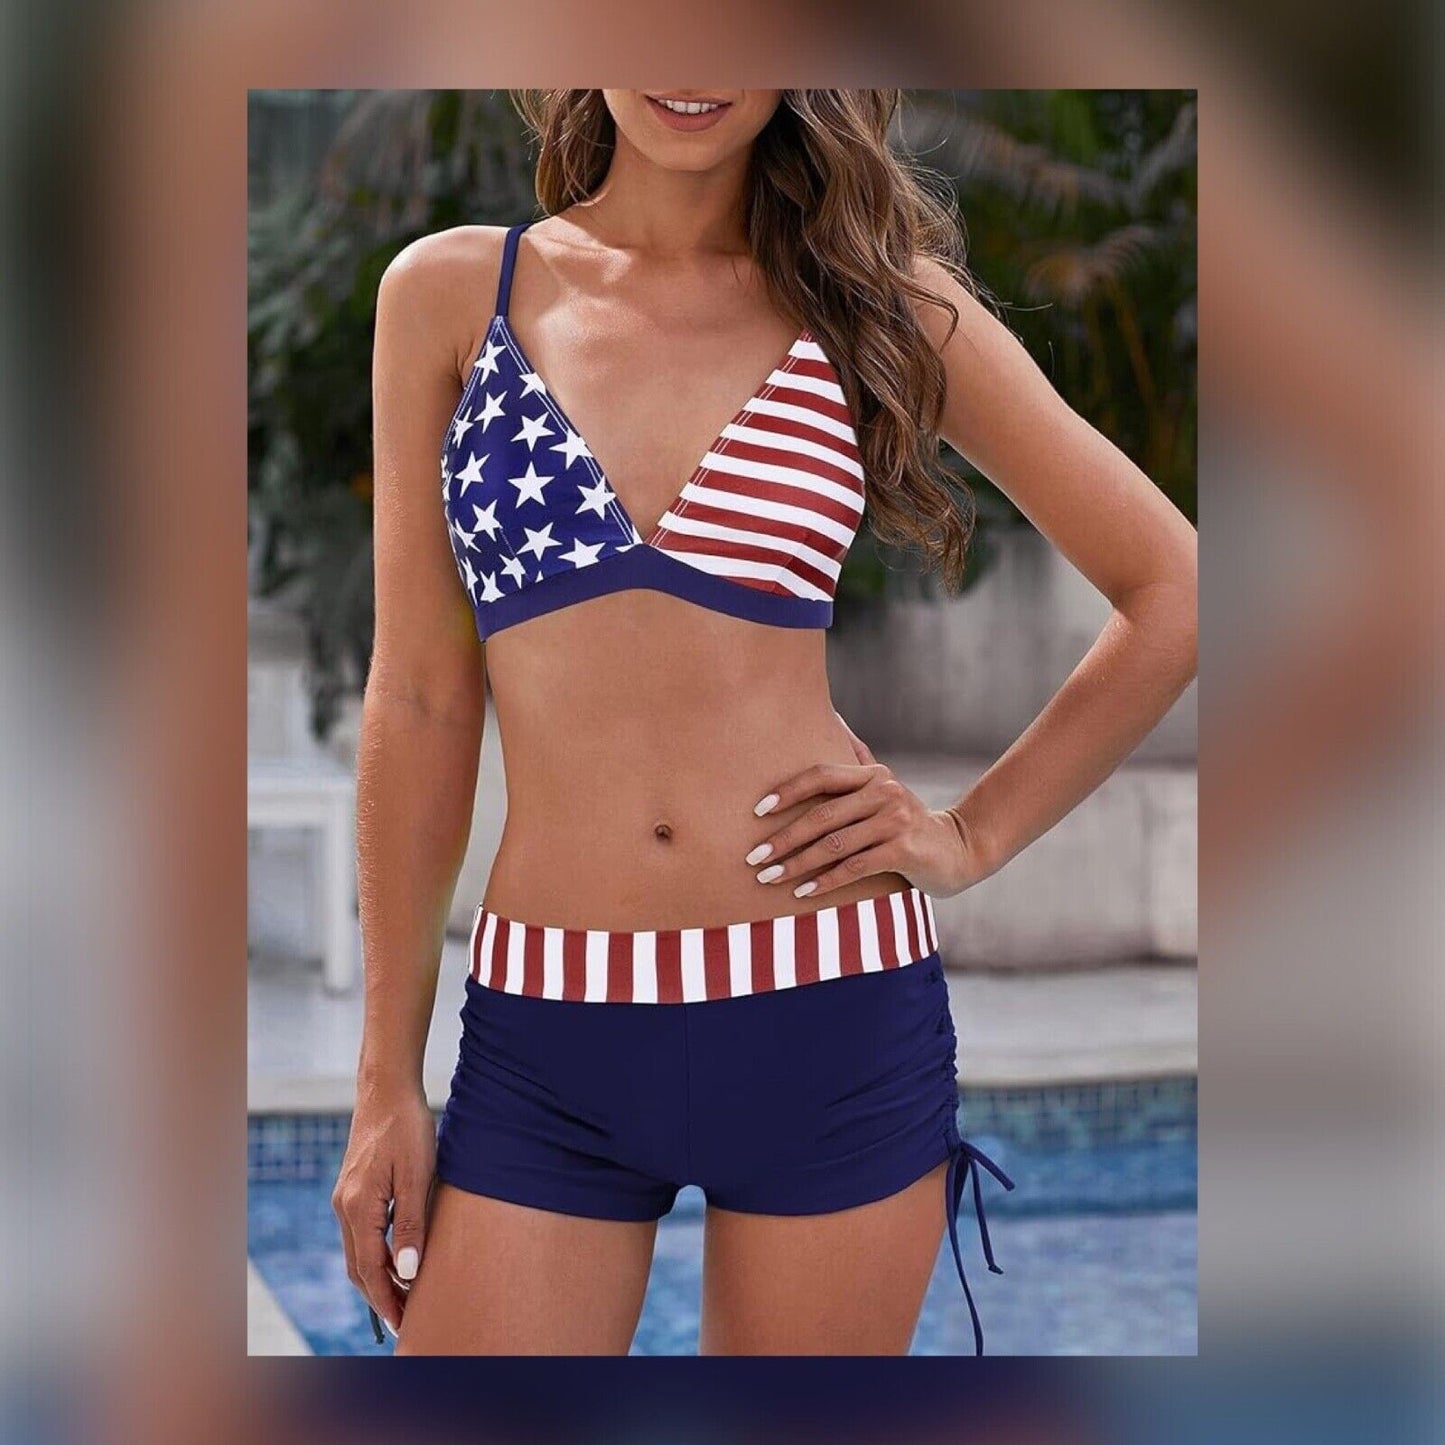 Women's Sporty Two Piece Swimsuits US Flag Halter Push Up Bathing Suit